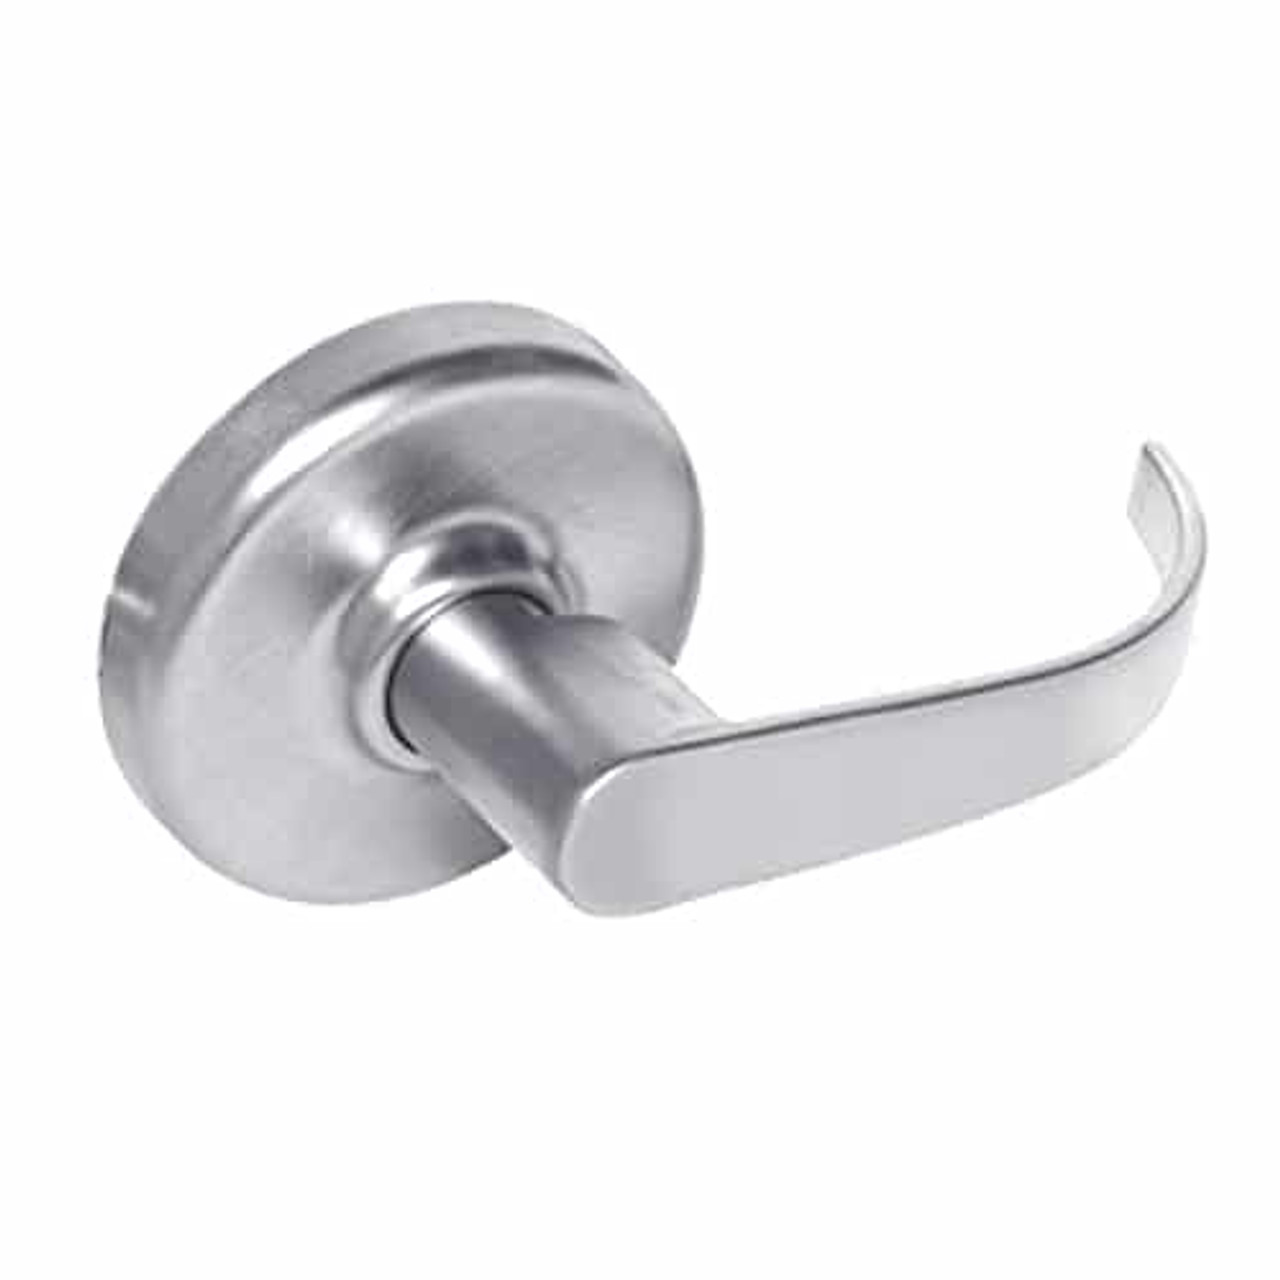 CL3510-PZD-625 Corbin CL3500 Series Heavy Duty Passage Cylindrical Locksets with Princeton Lever in Bright Chrome Finish